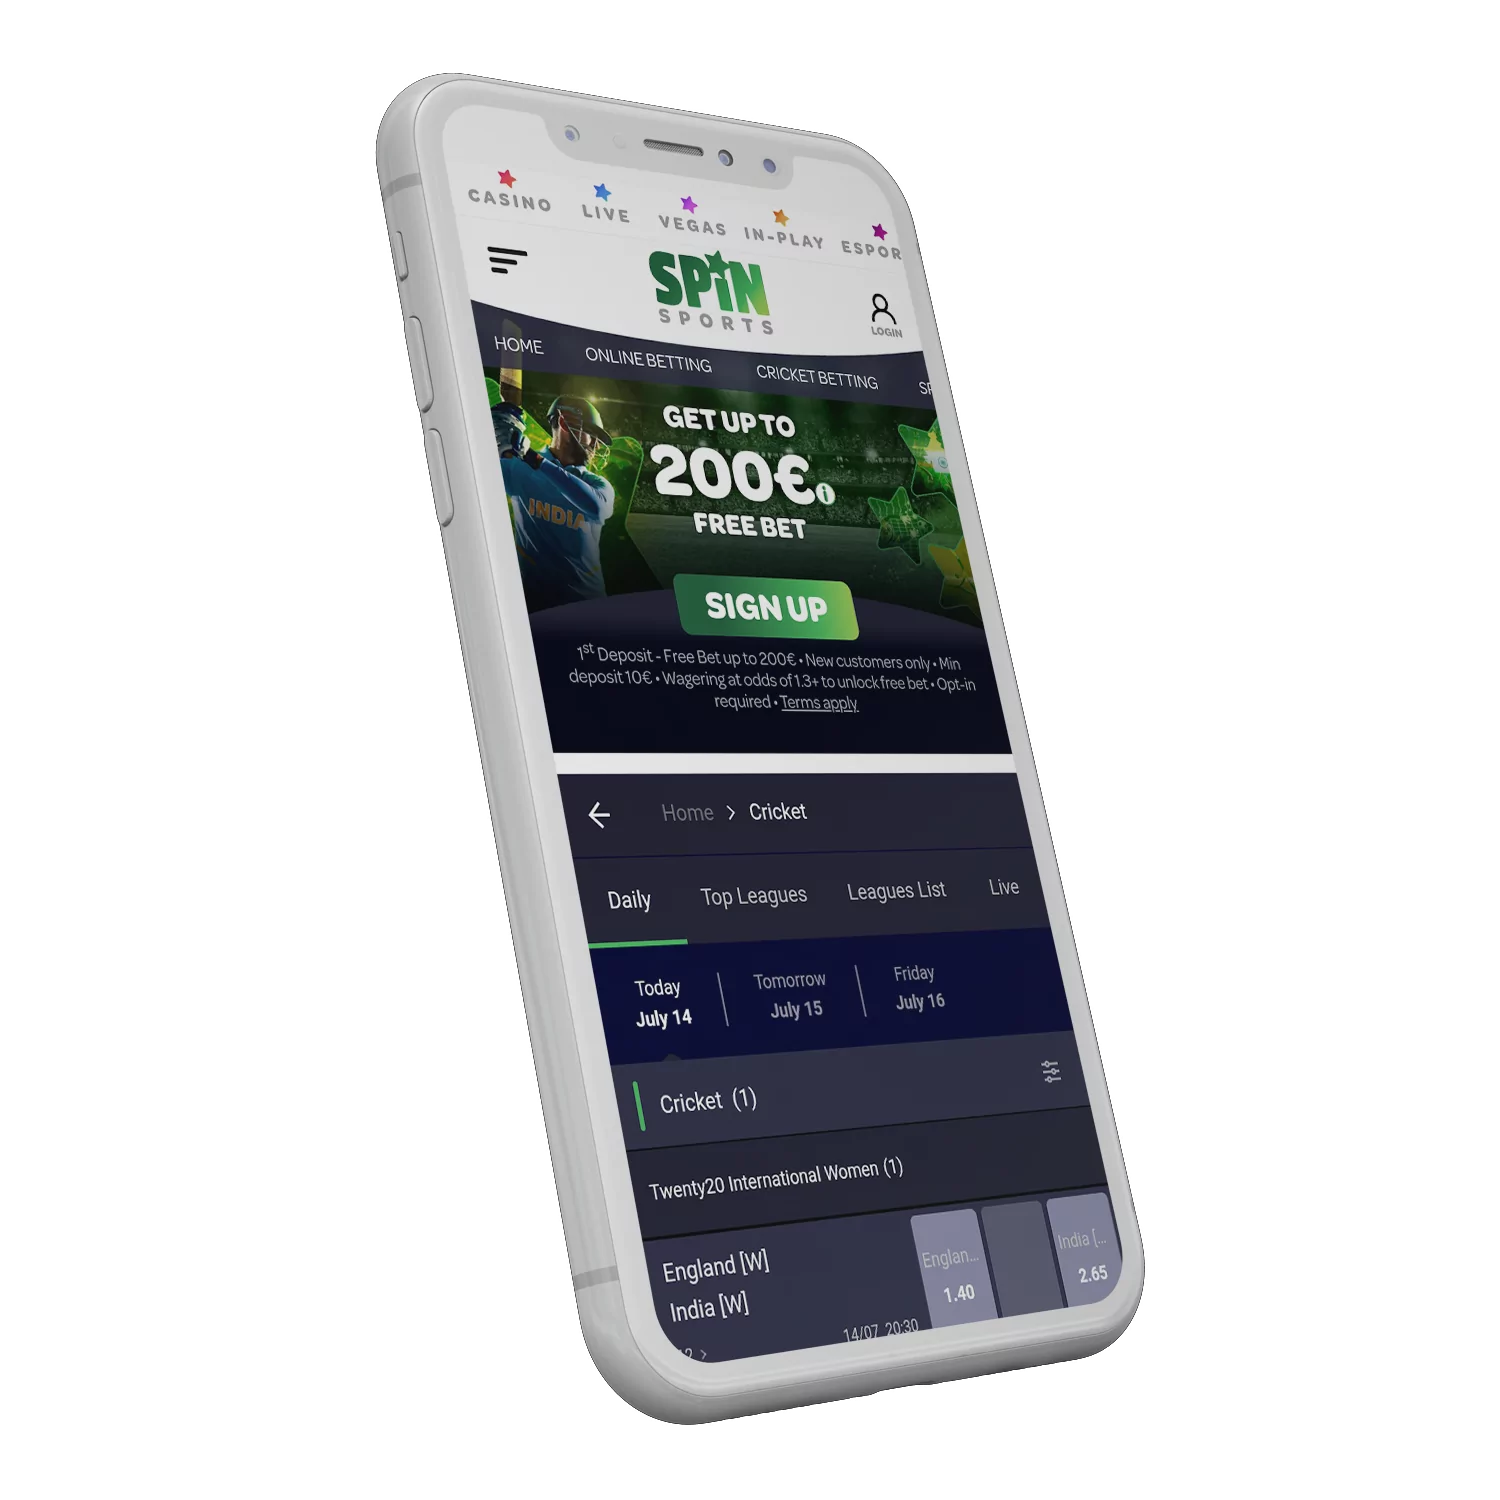 From this article, you learn about betting on the Spin Sports mobile site and app.